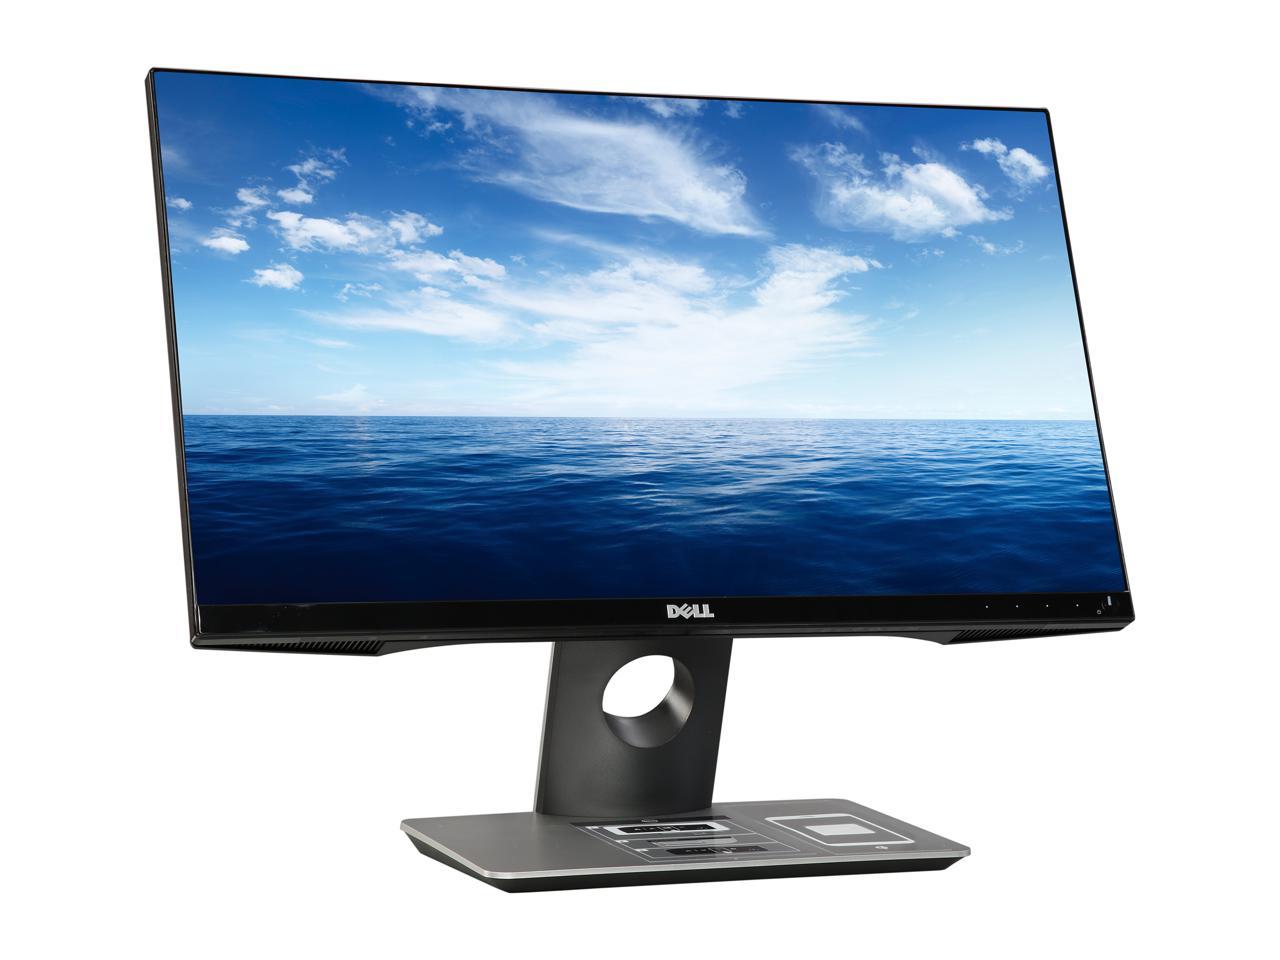 Dell S2317HWi Black 23" 6ms HDMI Widescreen LED Backlight LCD Monitor IPS 250 cd/m2 8,000,000:1 Built-in Speakers With Wireless Smart Phone Charing Stand